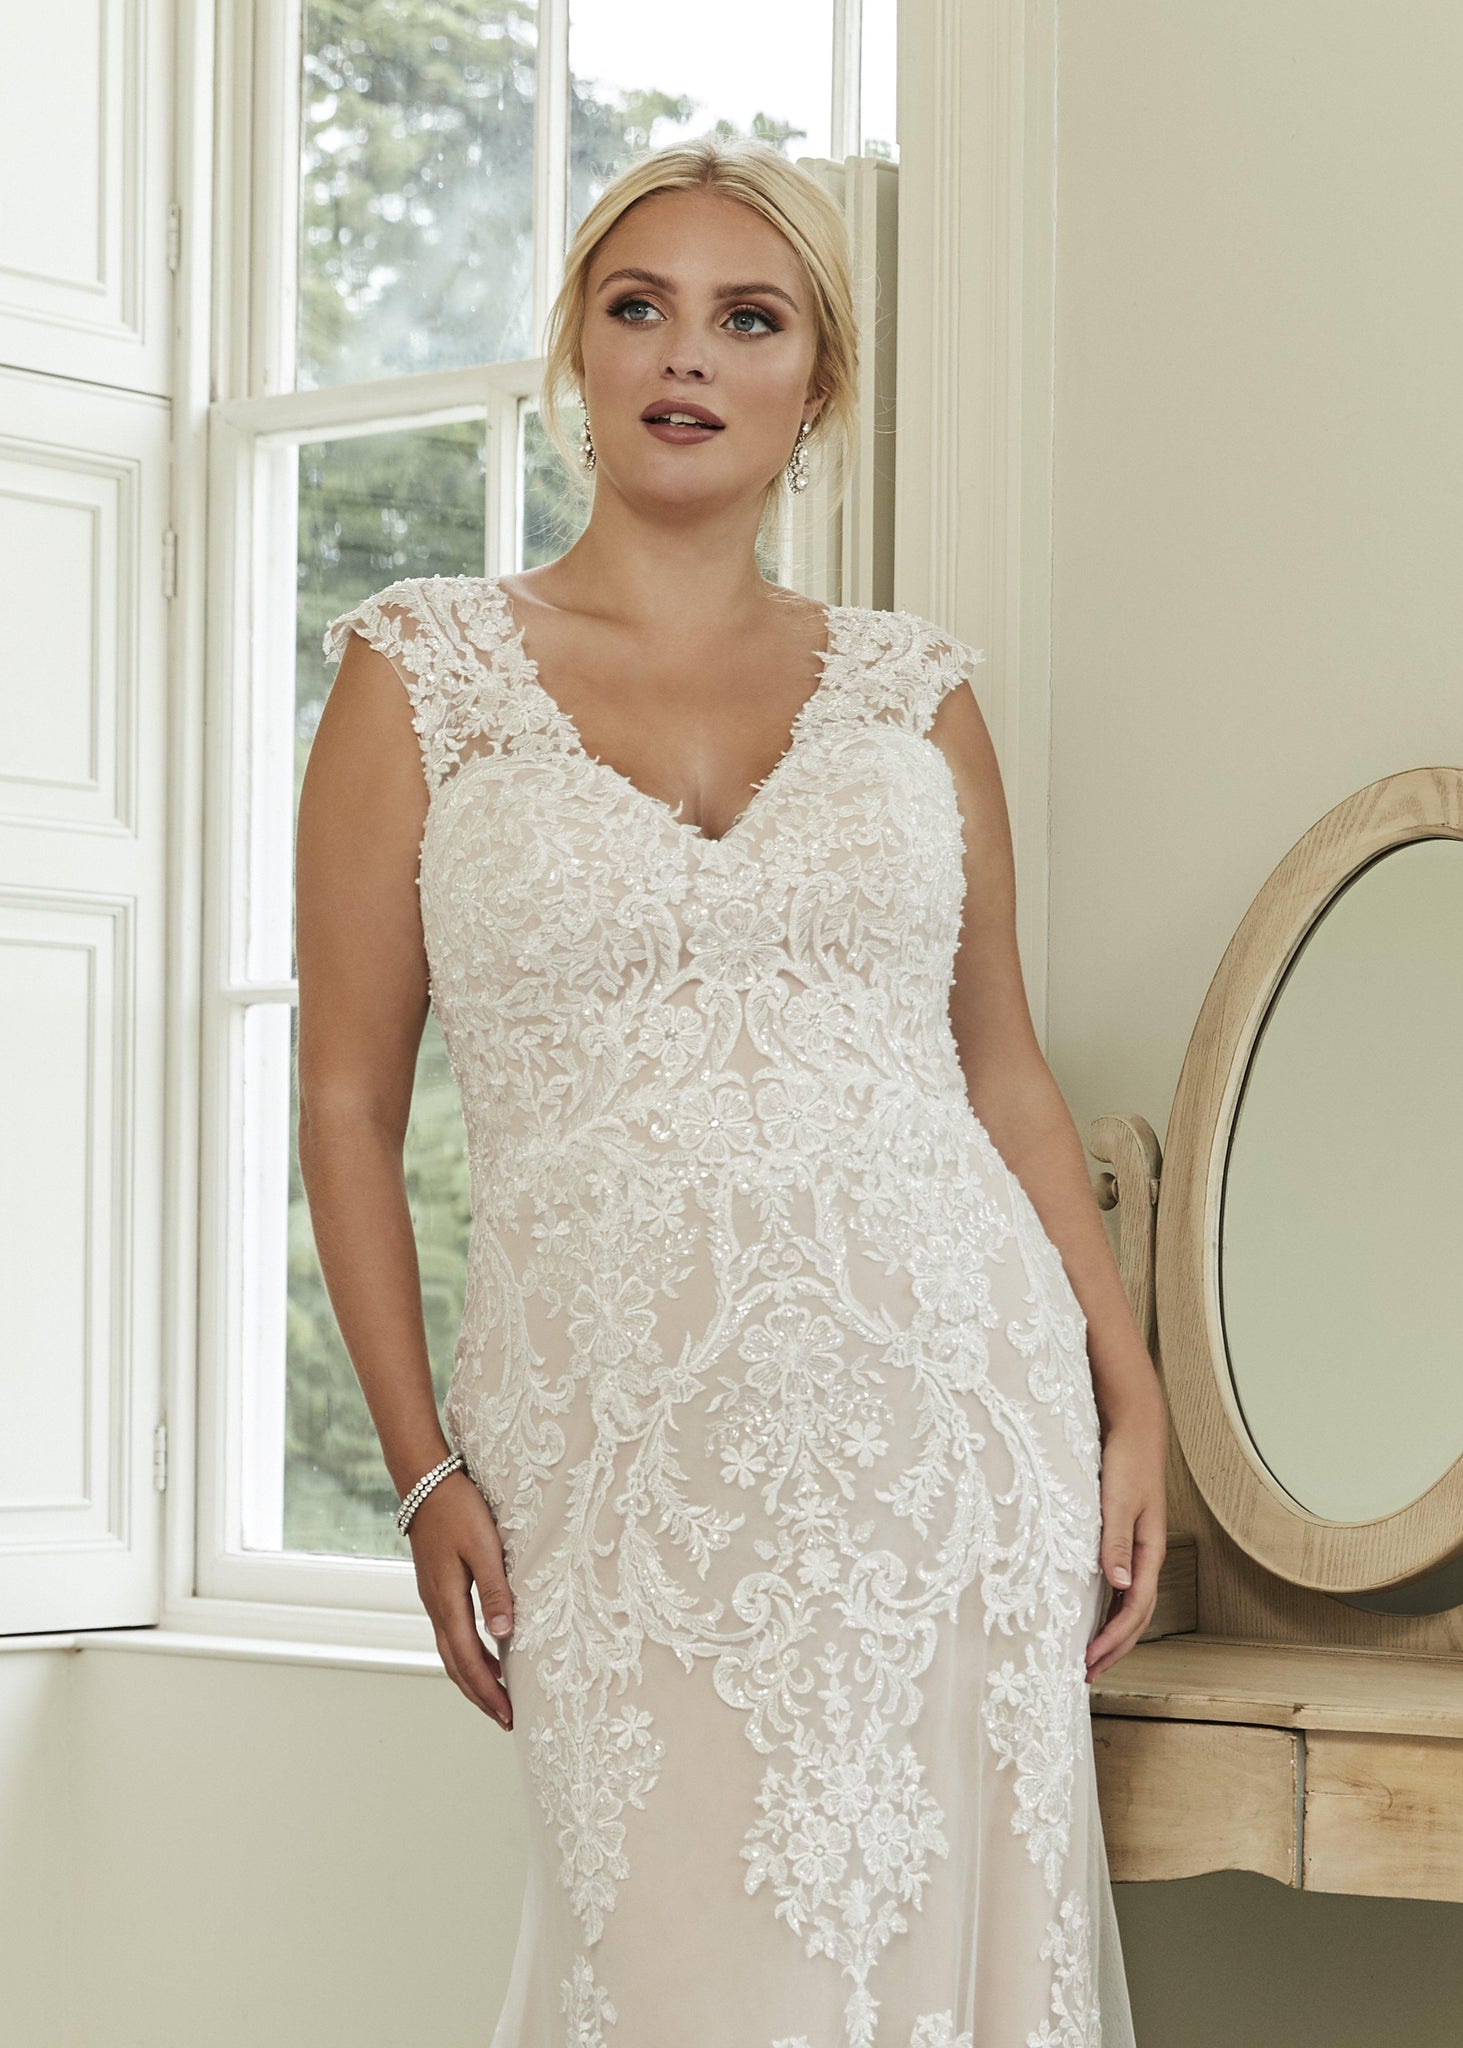 UK26 LisaMarie - Adore Bridal and Occasion Wear